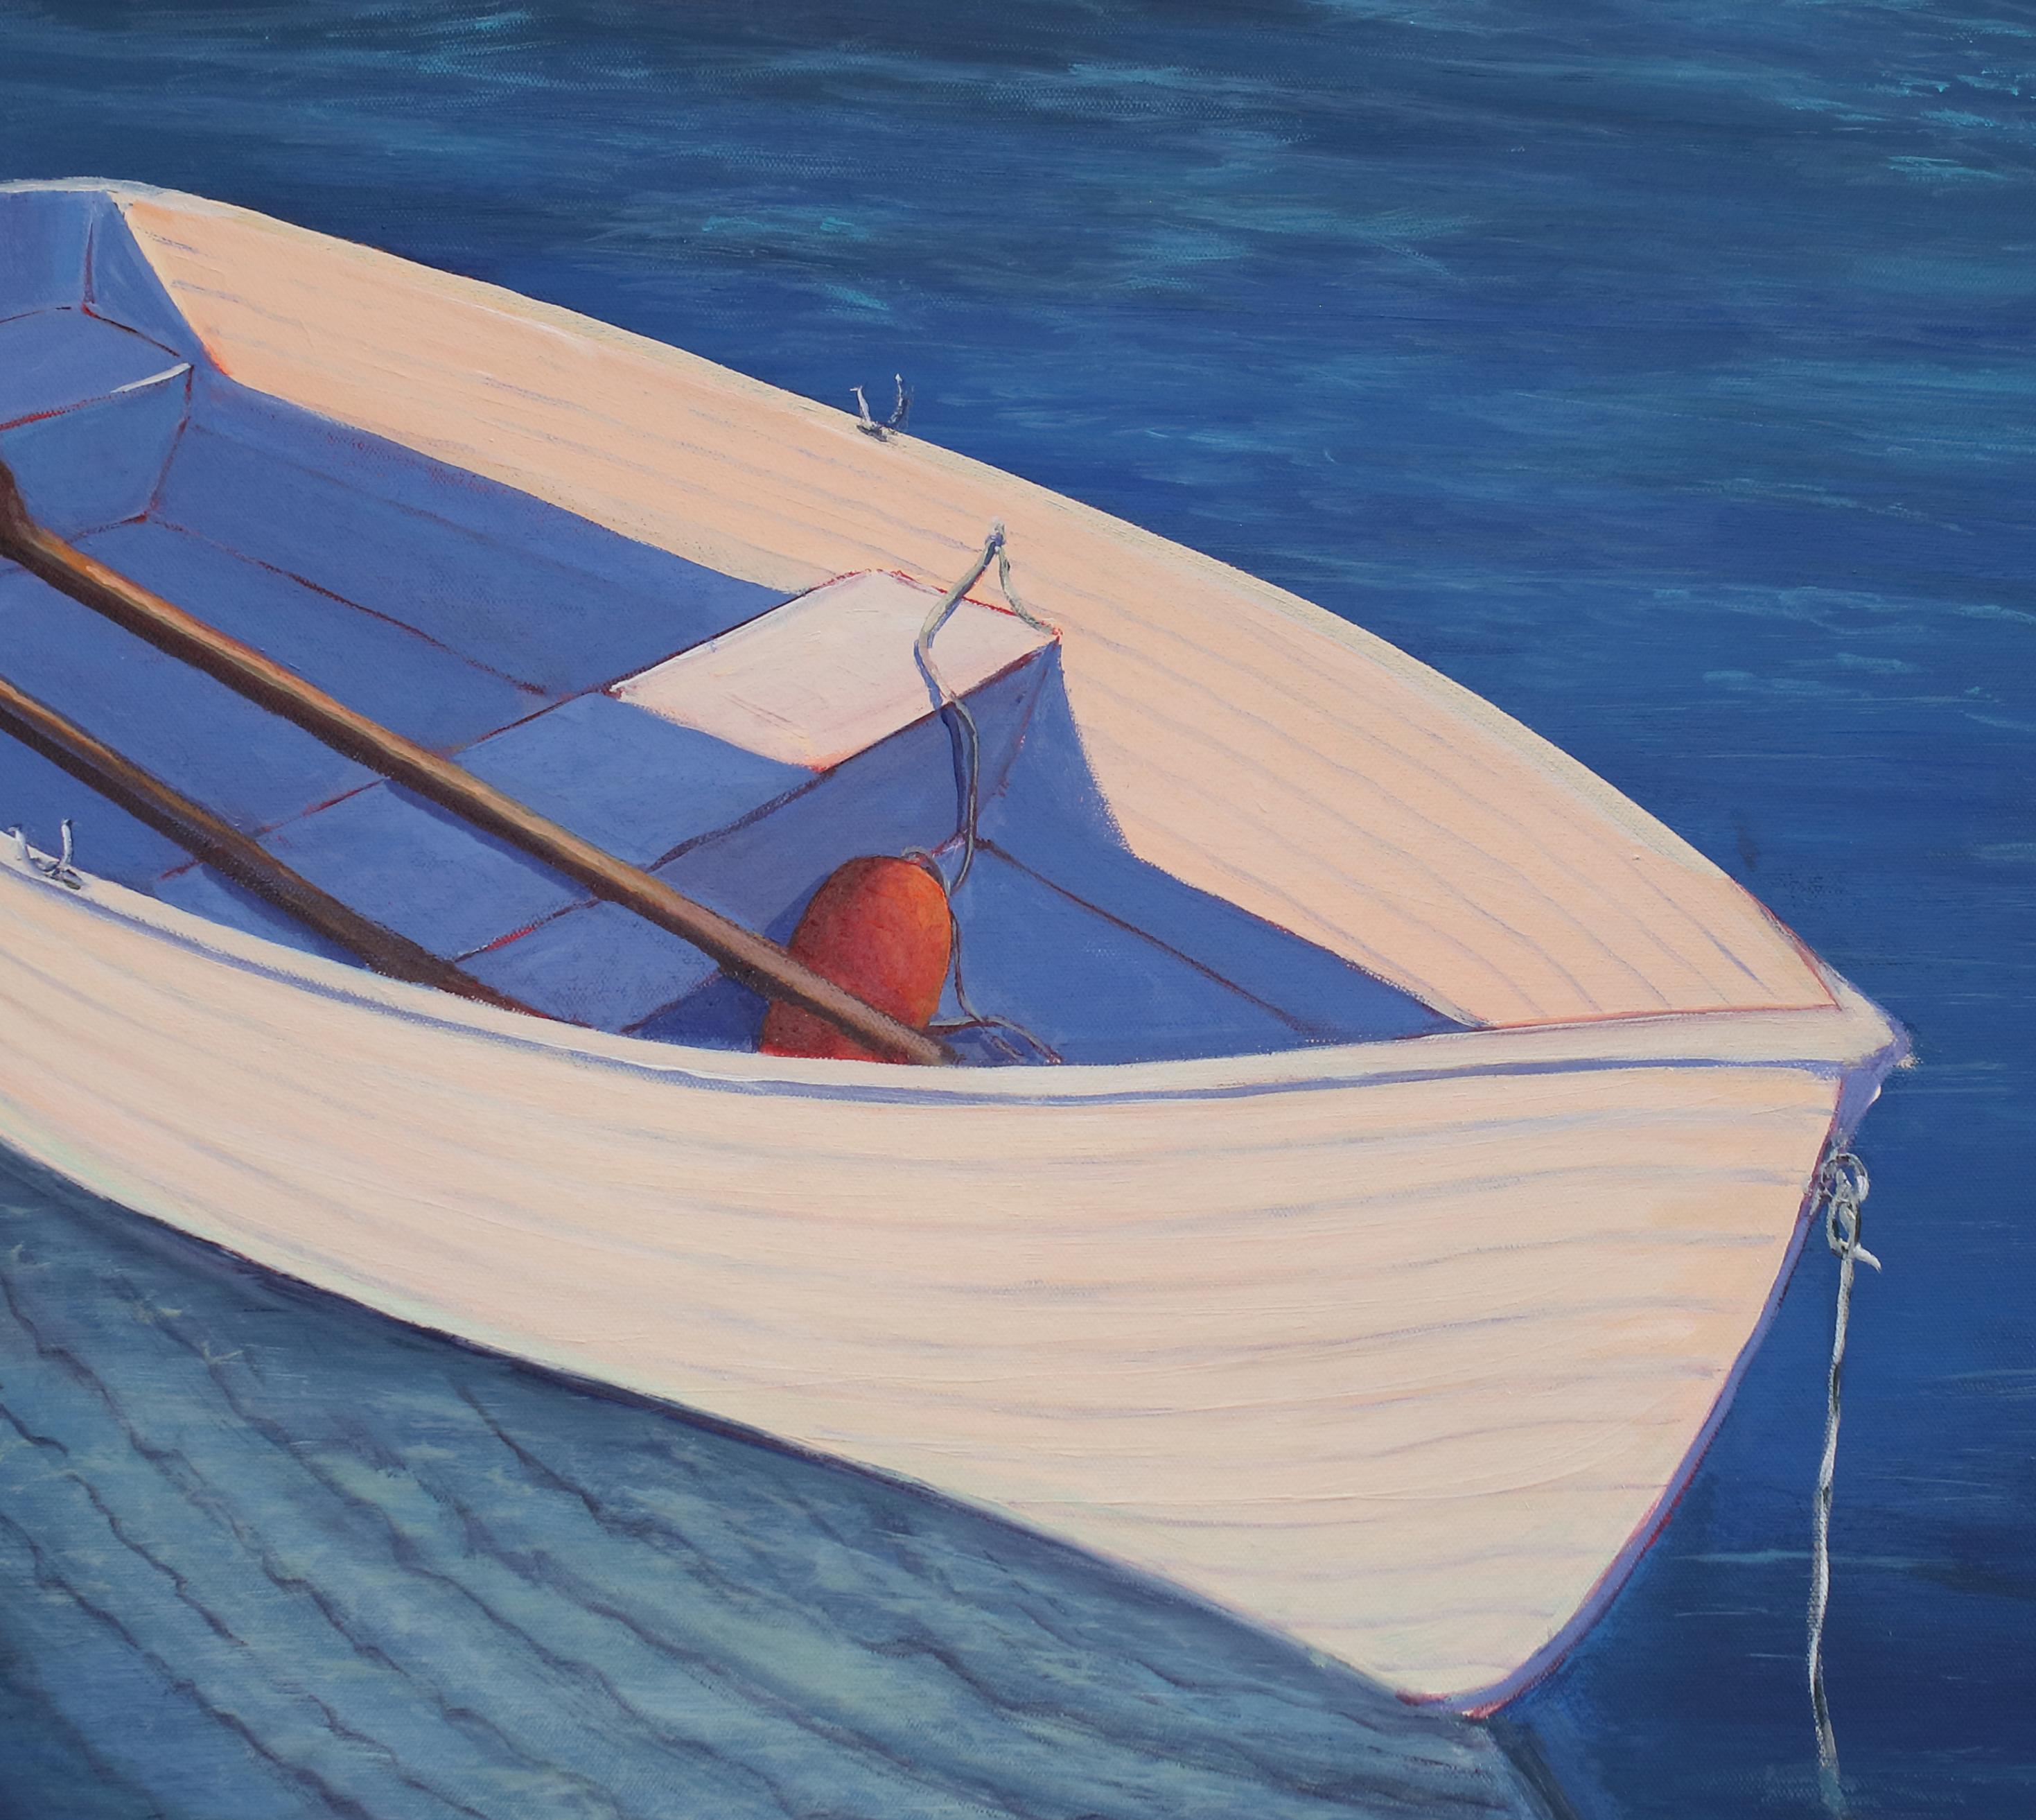 This contemporary coastal painting by Carol Young captures a small white dinghy boat, floating in deep blue water. Two red ores rest inside the boat. which casts a reflection into the water beneath it. The painting is painted in acrylic paint on